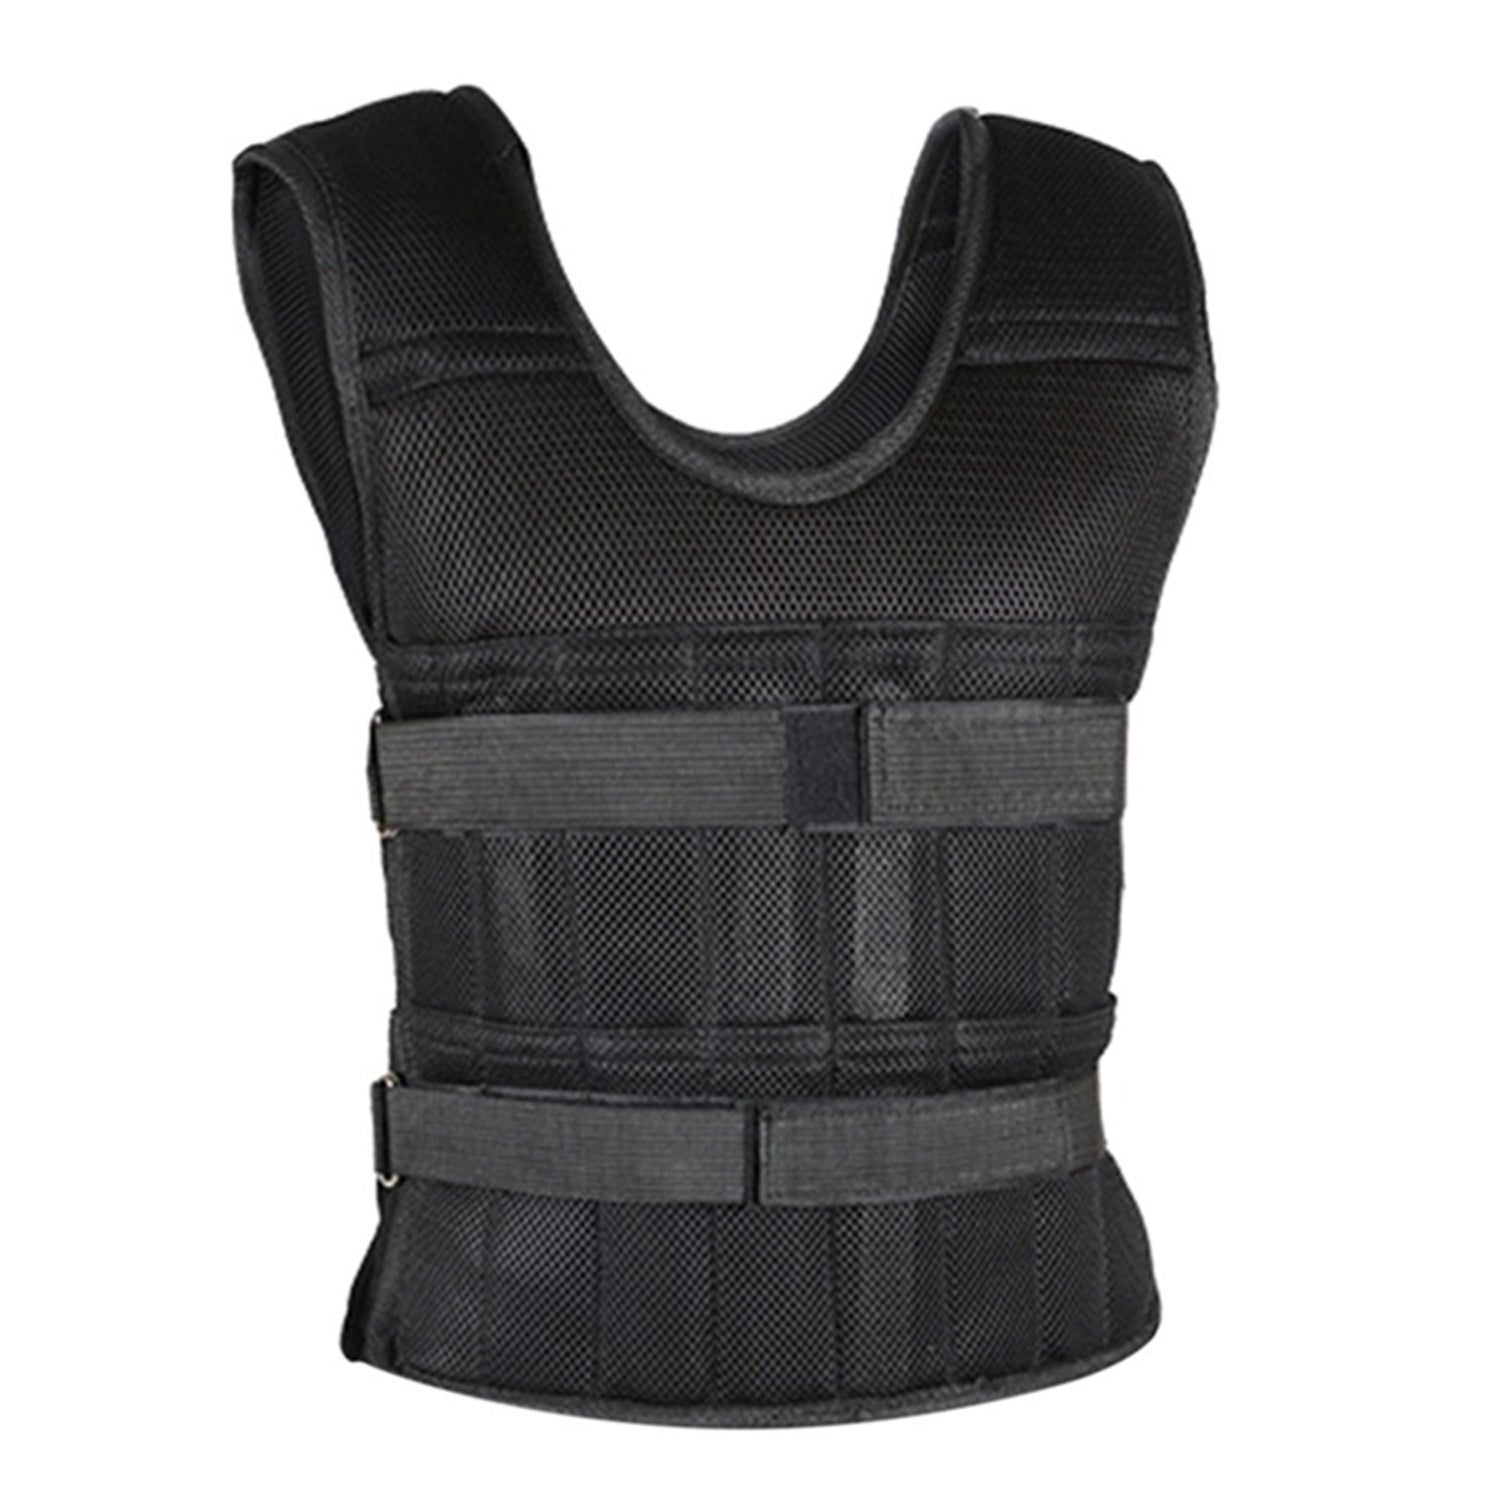 35kg Capacity Weight Vest ONLY Weighted Resistance Training Load Bearing Running Gym